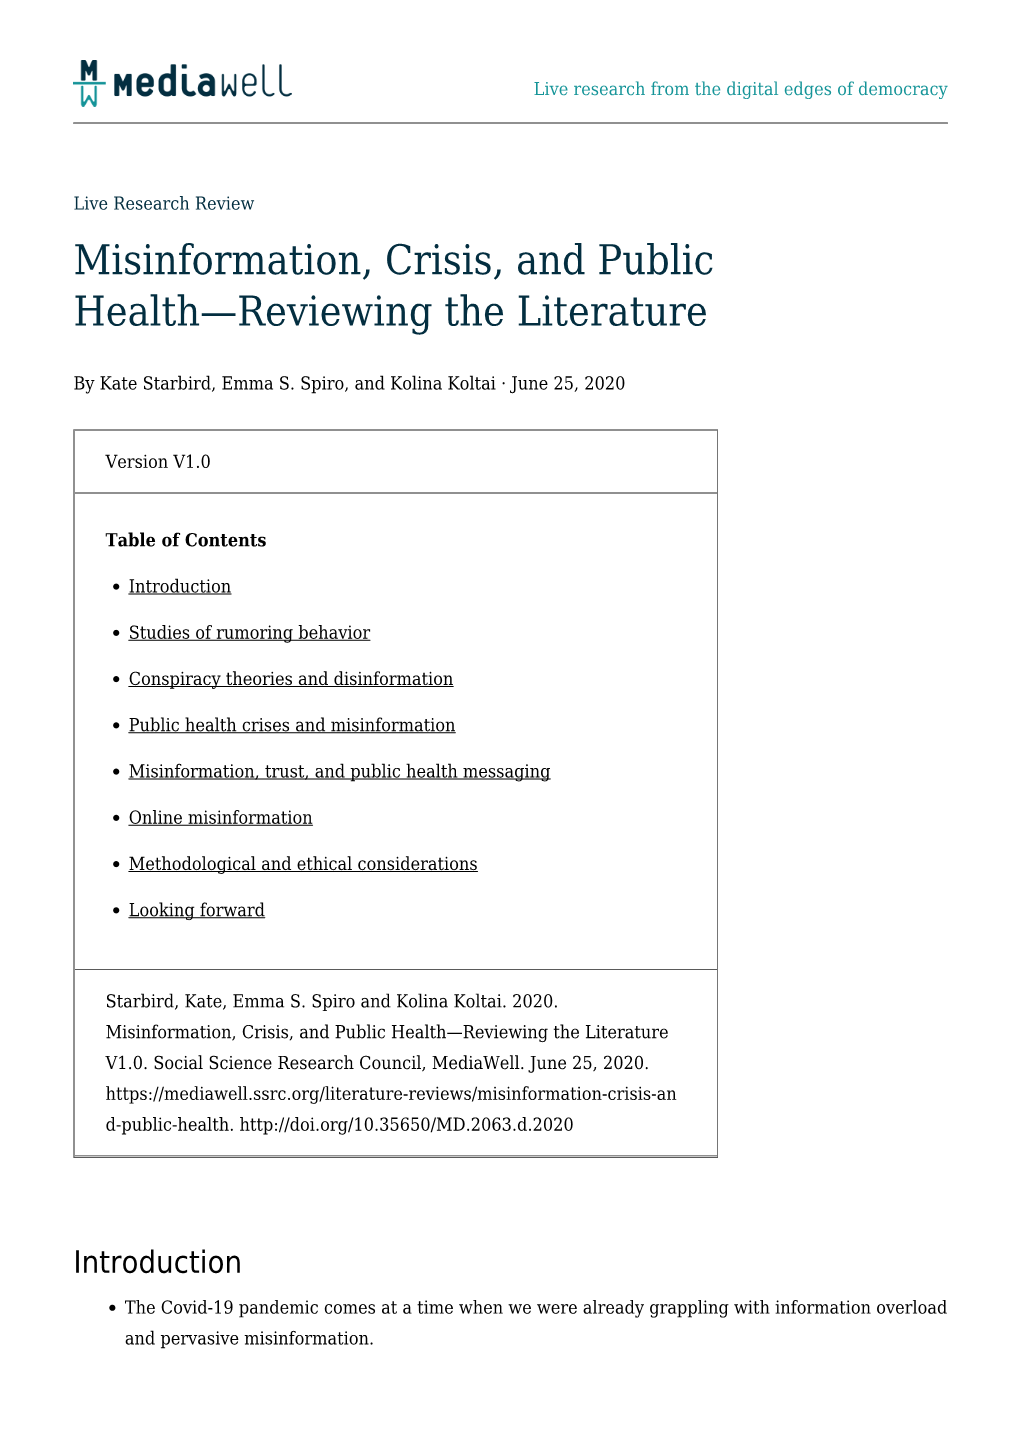 Misinformation, Crisis, and Public Health—Reviewing the Literature